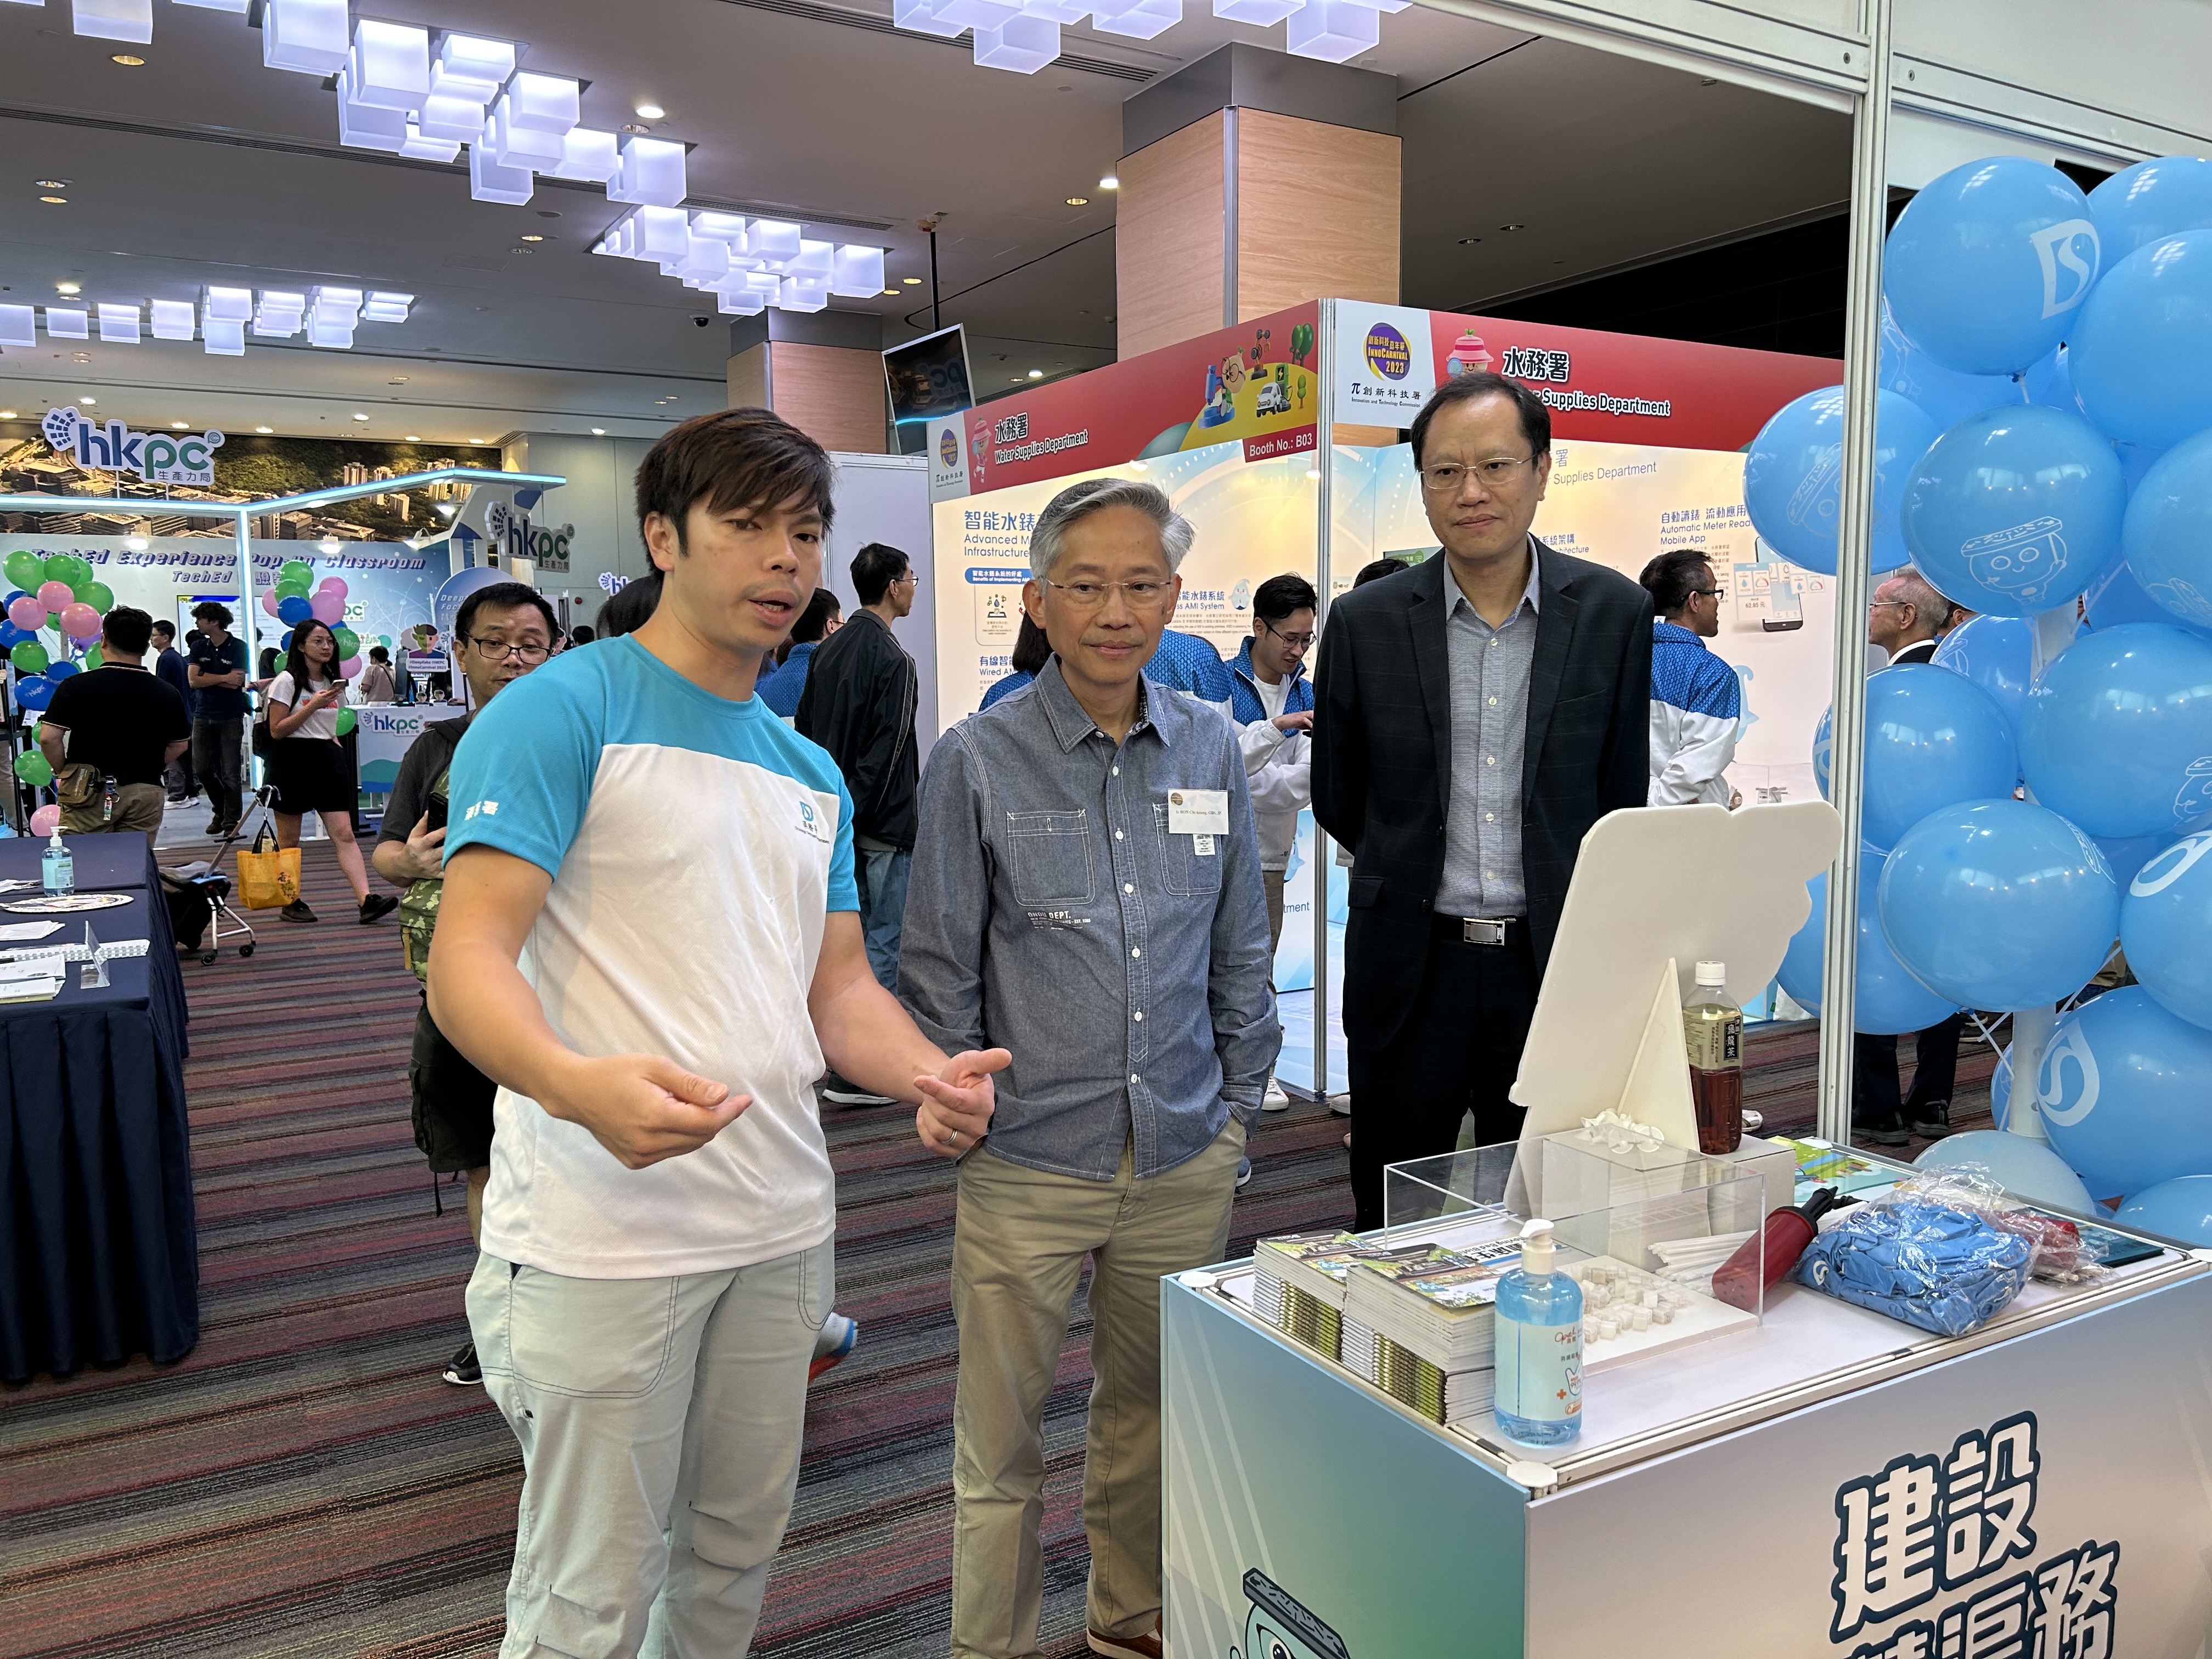 Former Permanent Secretary for Development (Works), Mr. HON Chi-keung (middle), accompanied by the Acting Director of Drainage Services, Mr CHUI Si-kay (first right), visited DSD's exhibition booth